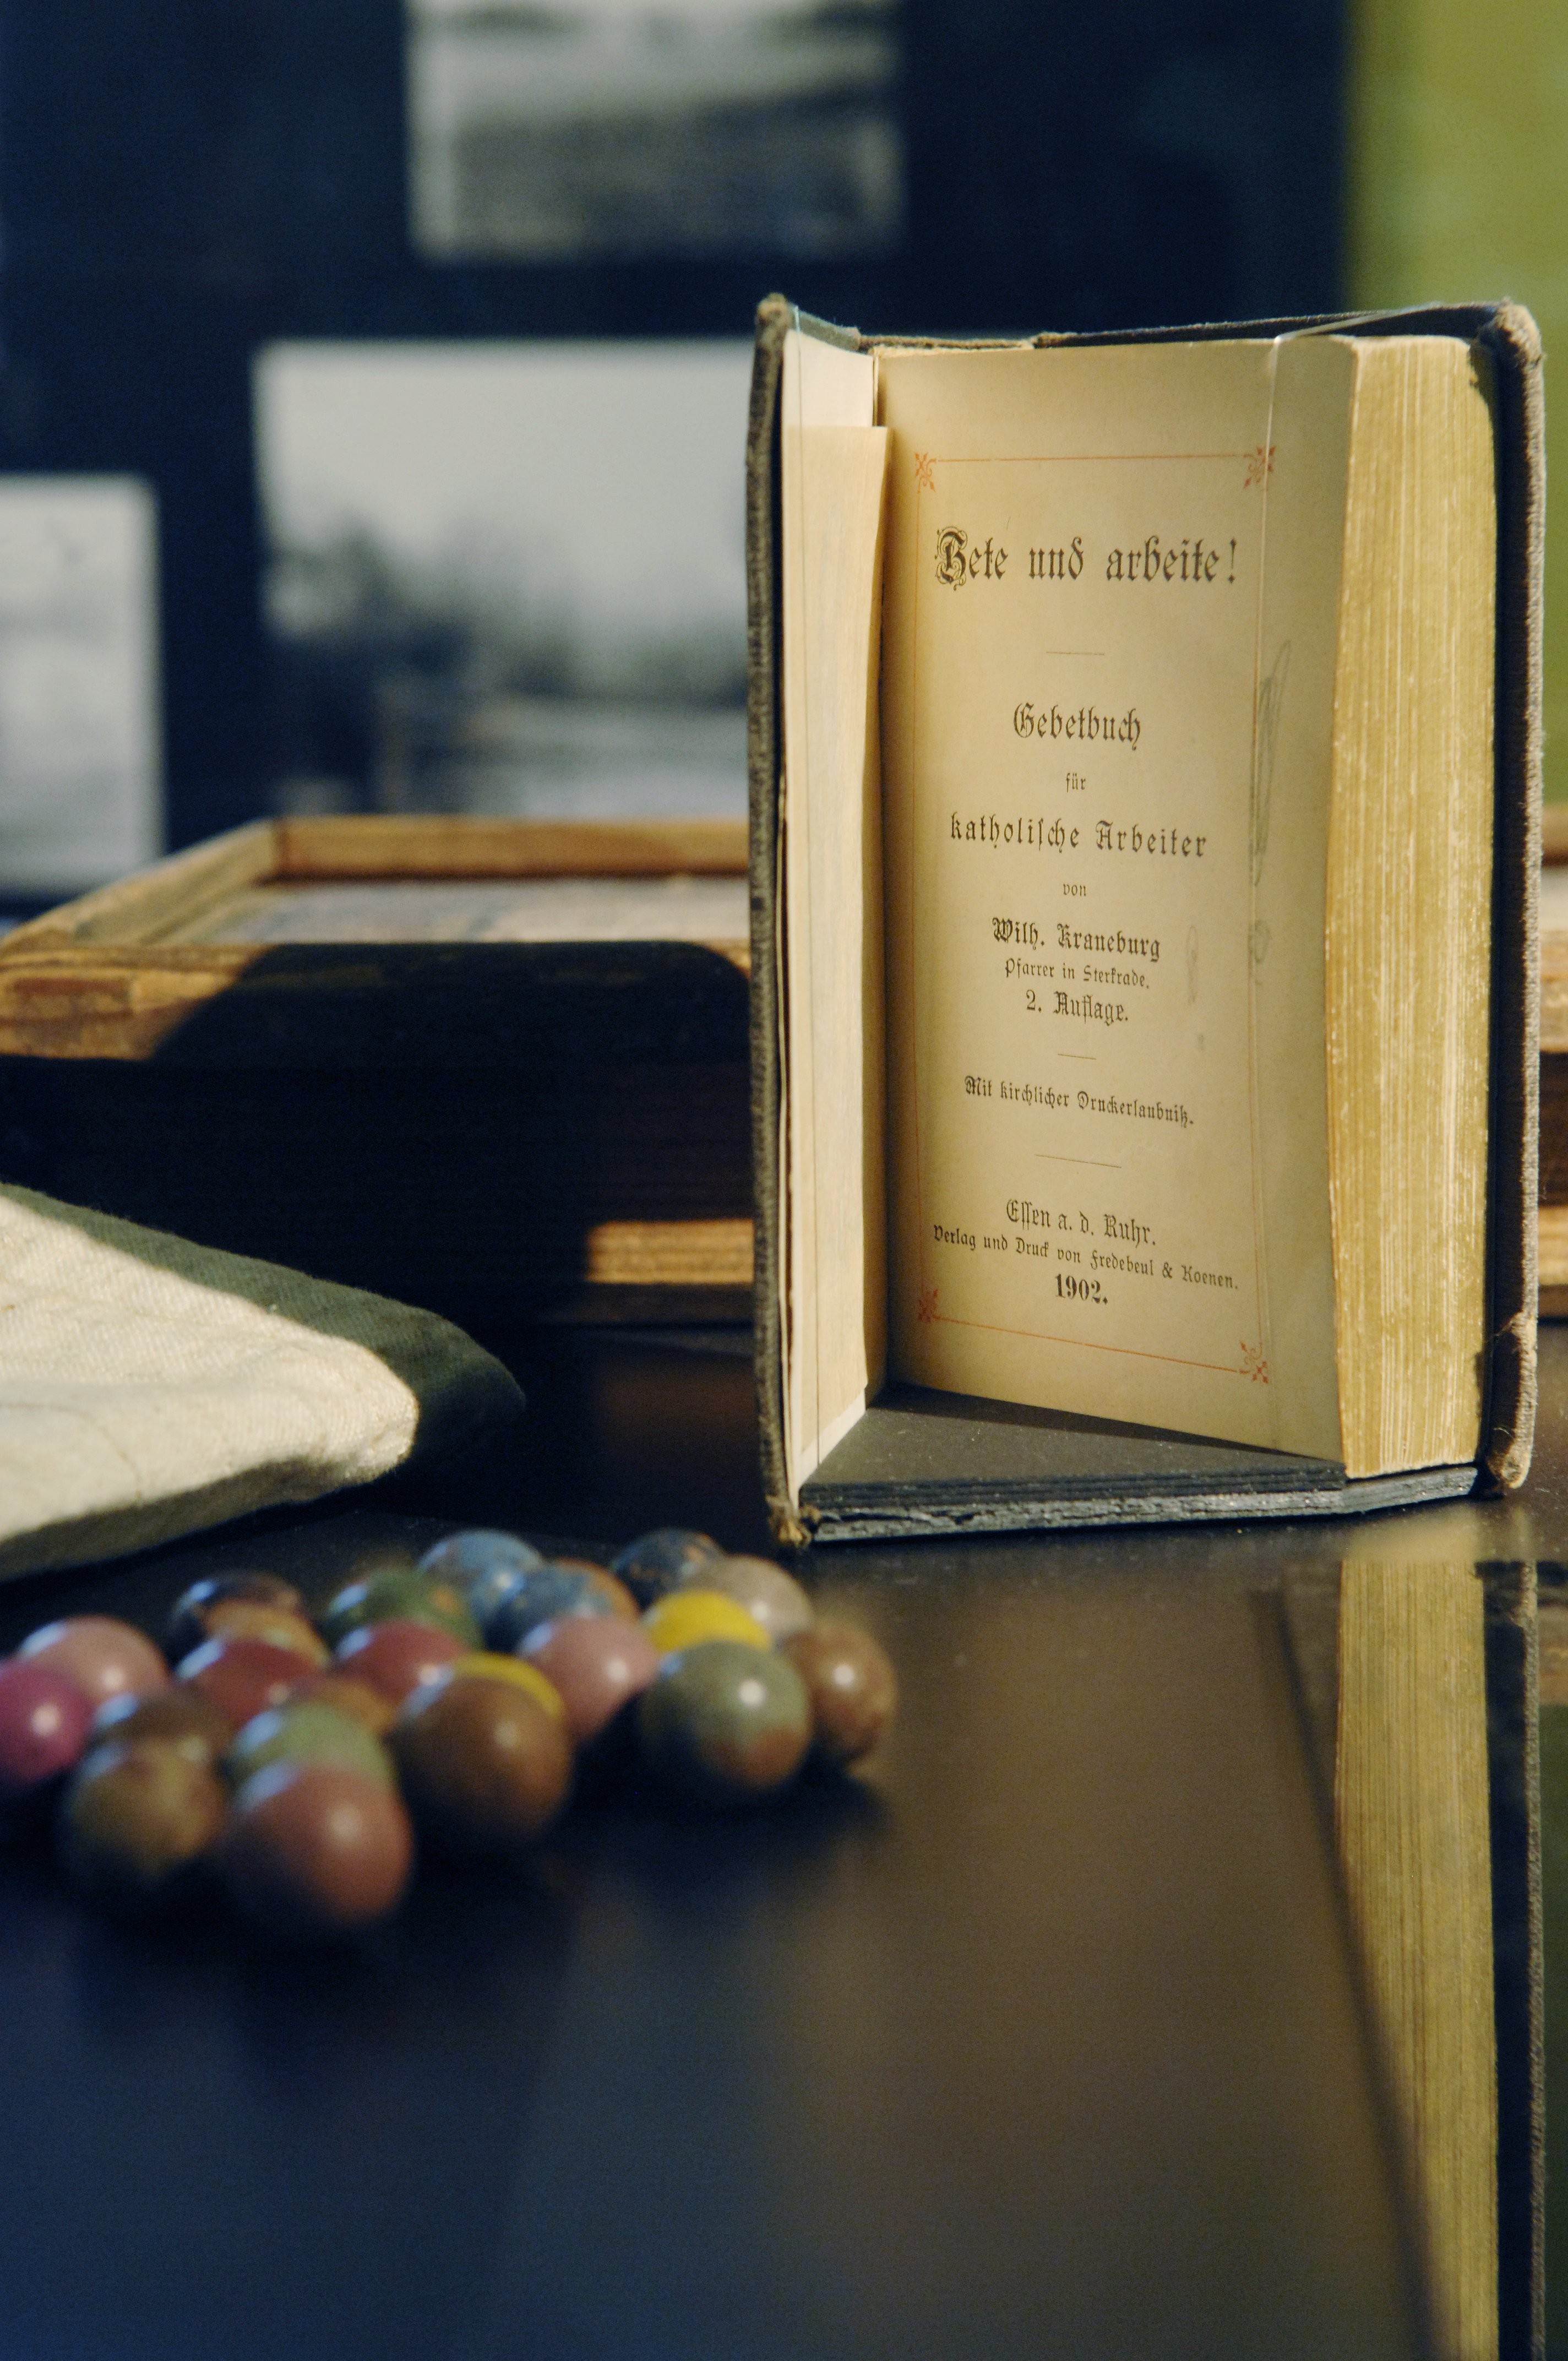 Clay marbles were one of the few toys available to workers’ children and prayer books often the only literature.